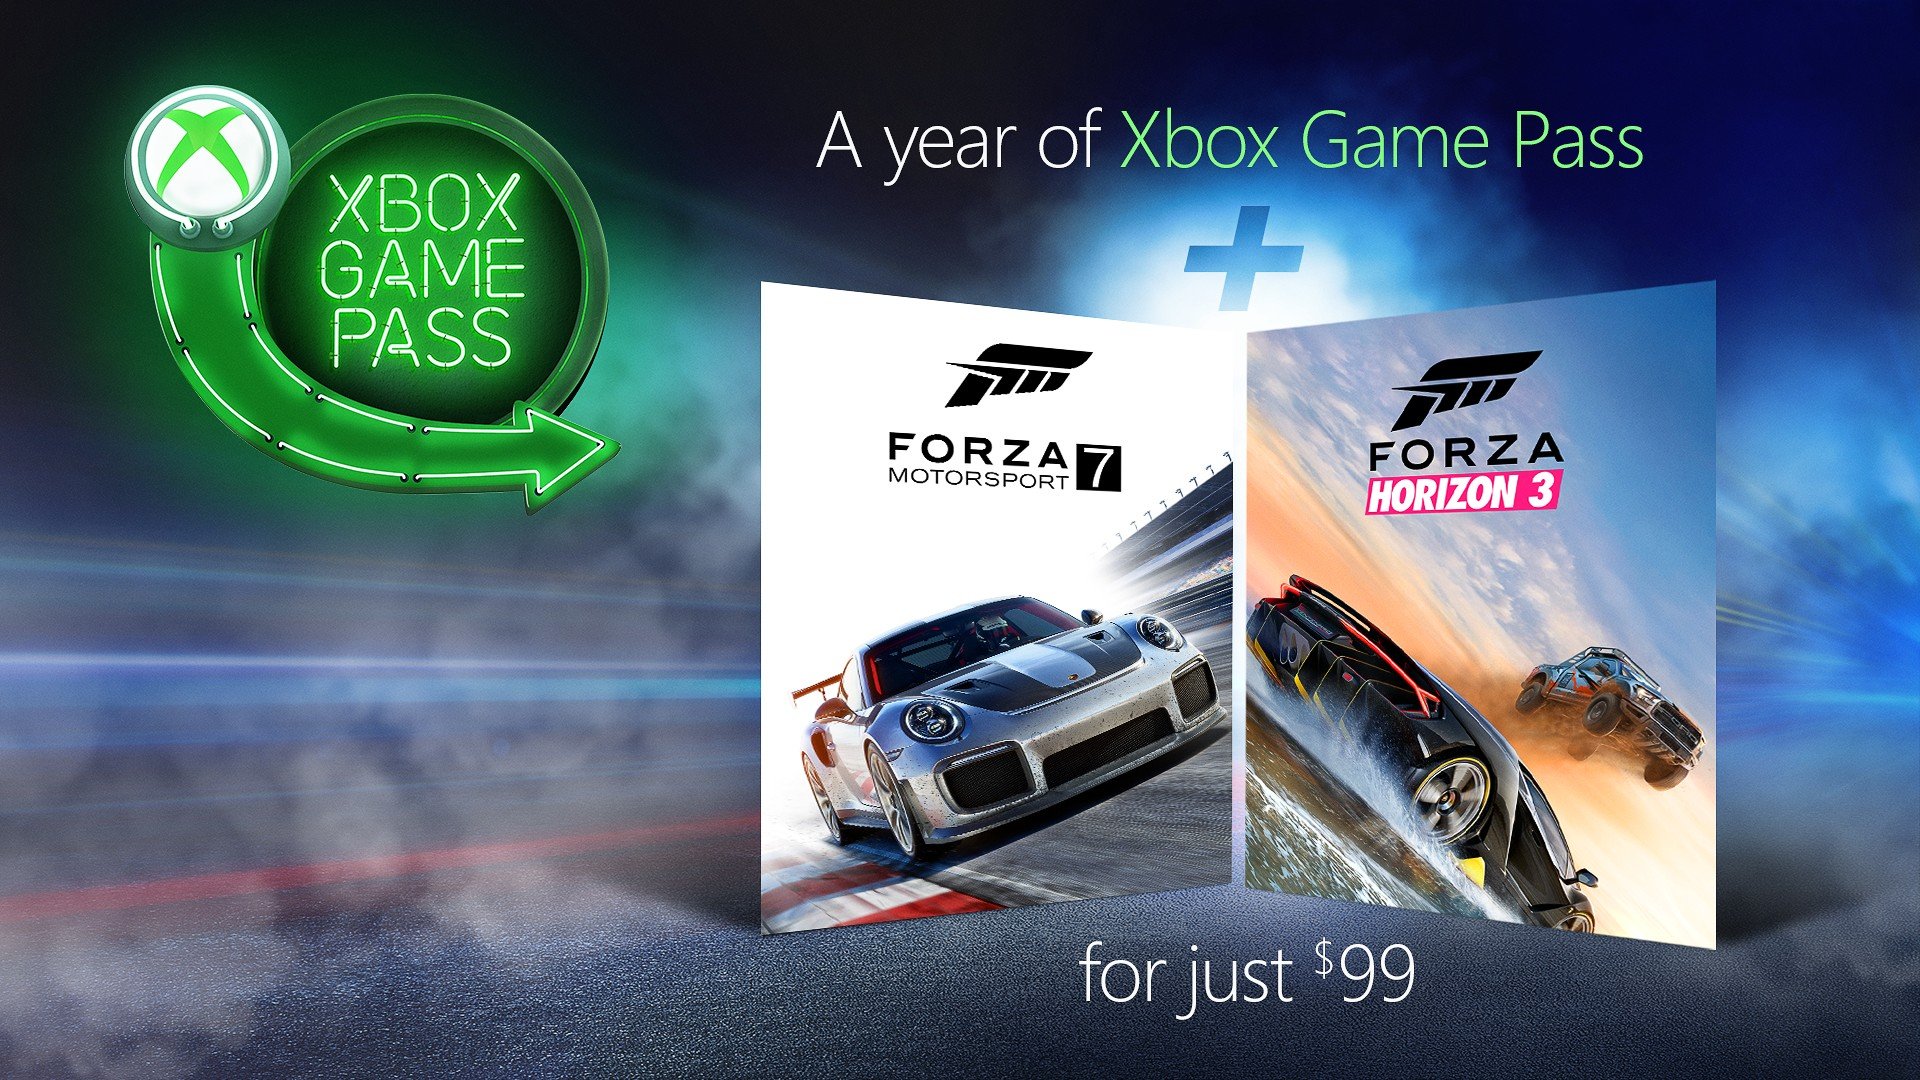 Aja Frightening Trickle Microsoft is offering two Forza games and a year of Xbox Game Pass for $99  - MSPoweruser